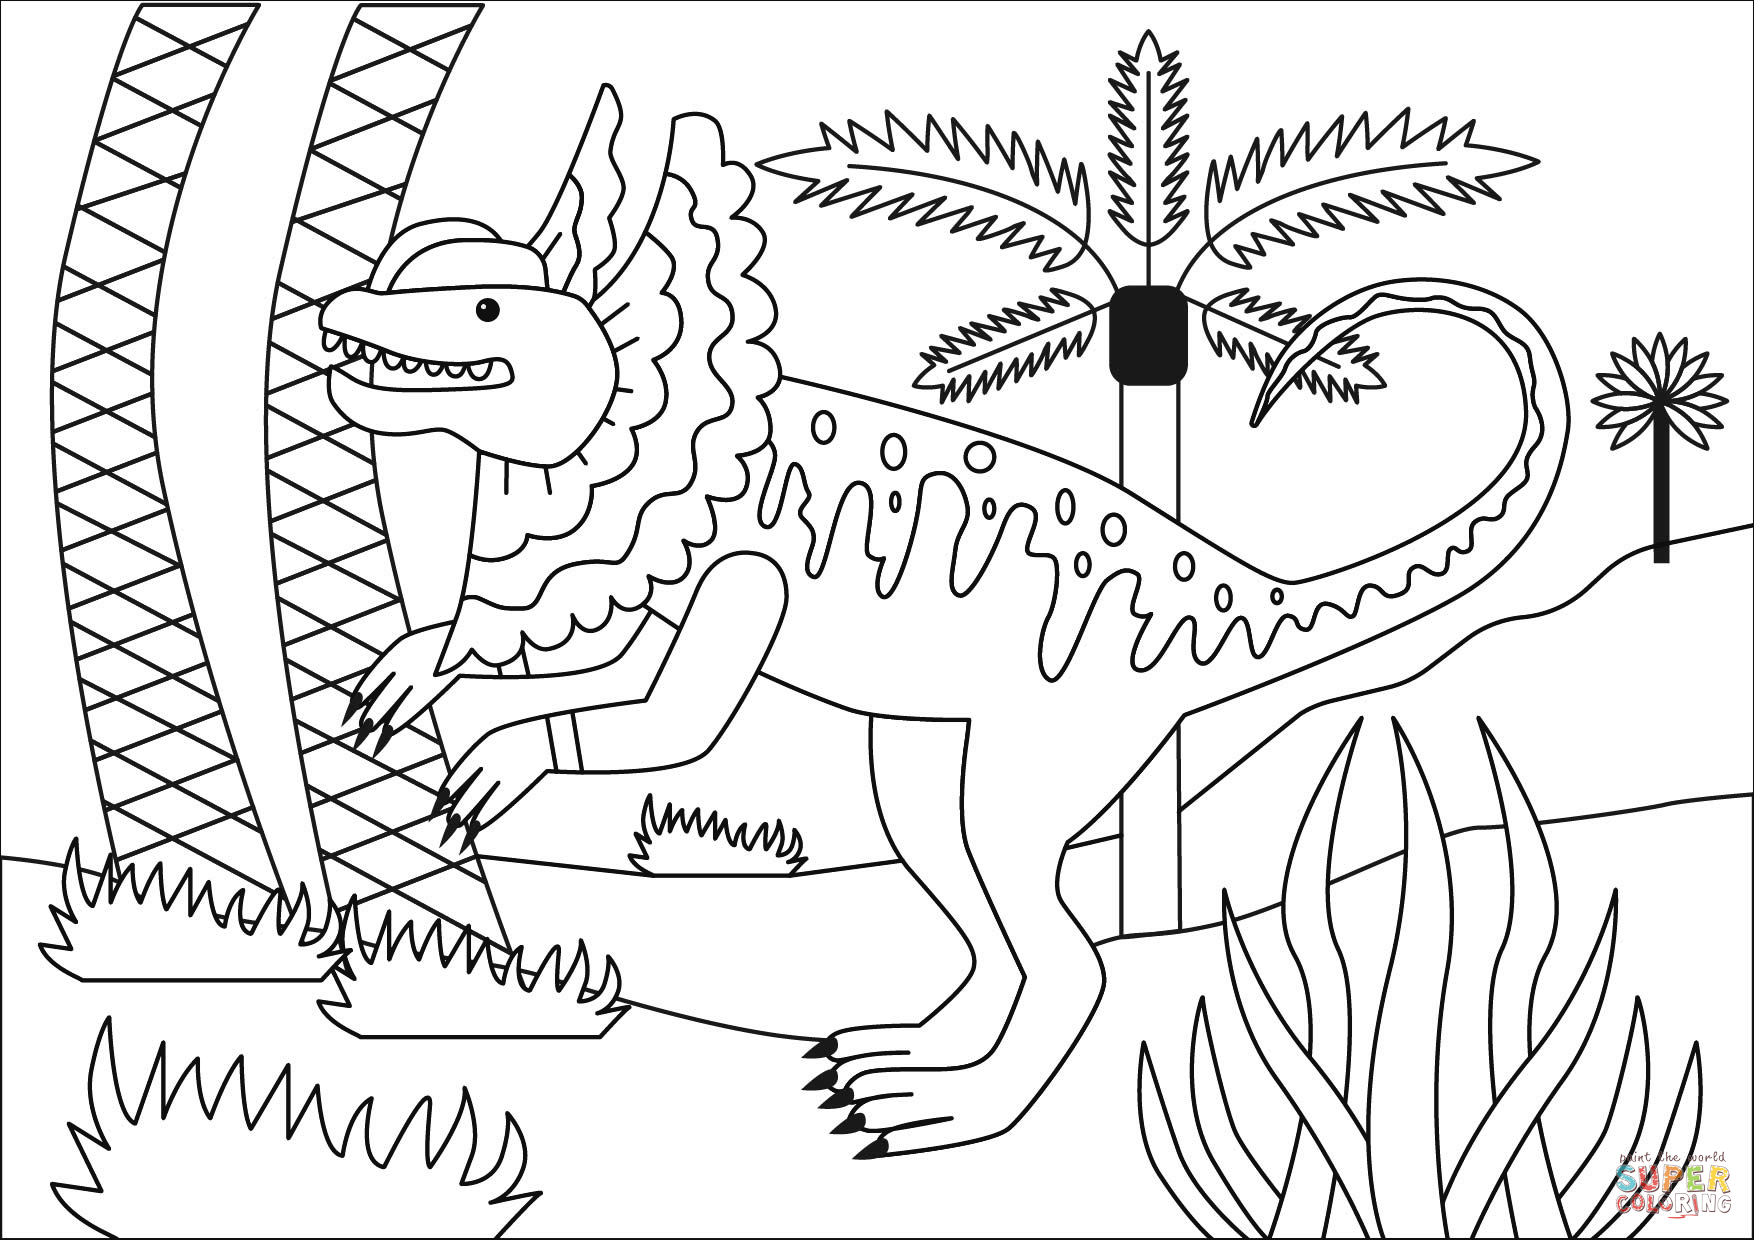 Dilophosaurus coloring page | Free Printable Coloring Pages